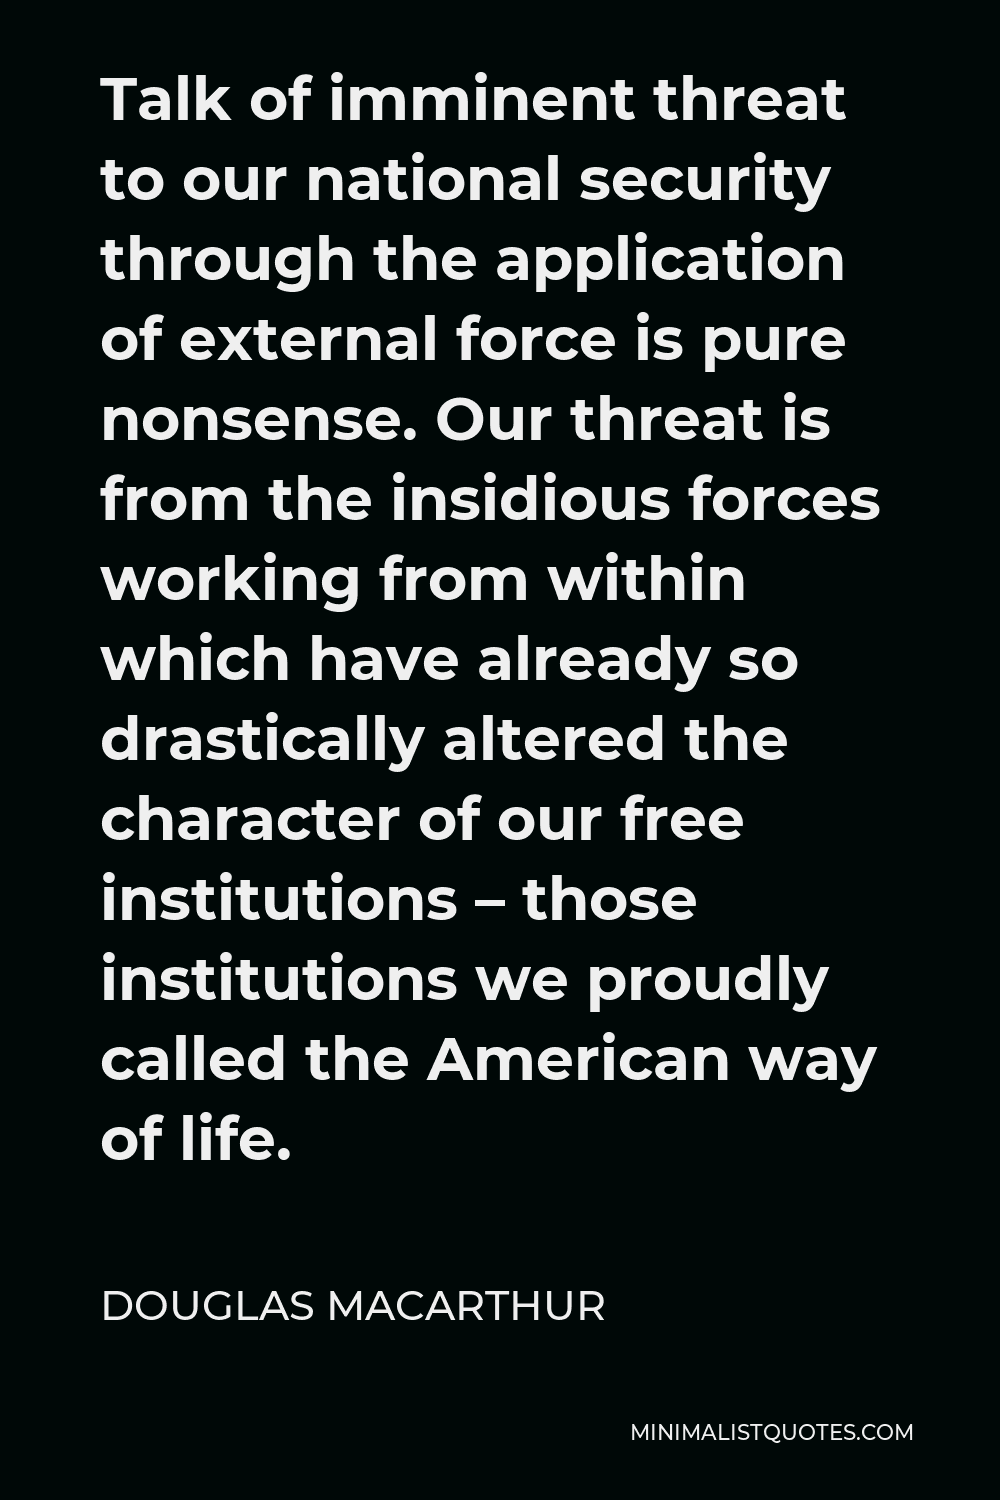 Douglas MacArthur Quote - Talk of imminent threat to our national security through the application of external force is pure nonsense. Our threat is from the insidious forces working from within which have already so drastically altered the character of our free institutions – those institutions we proudly called the American way of life.